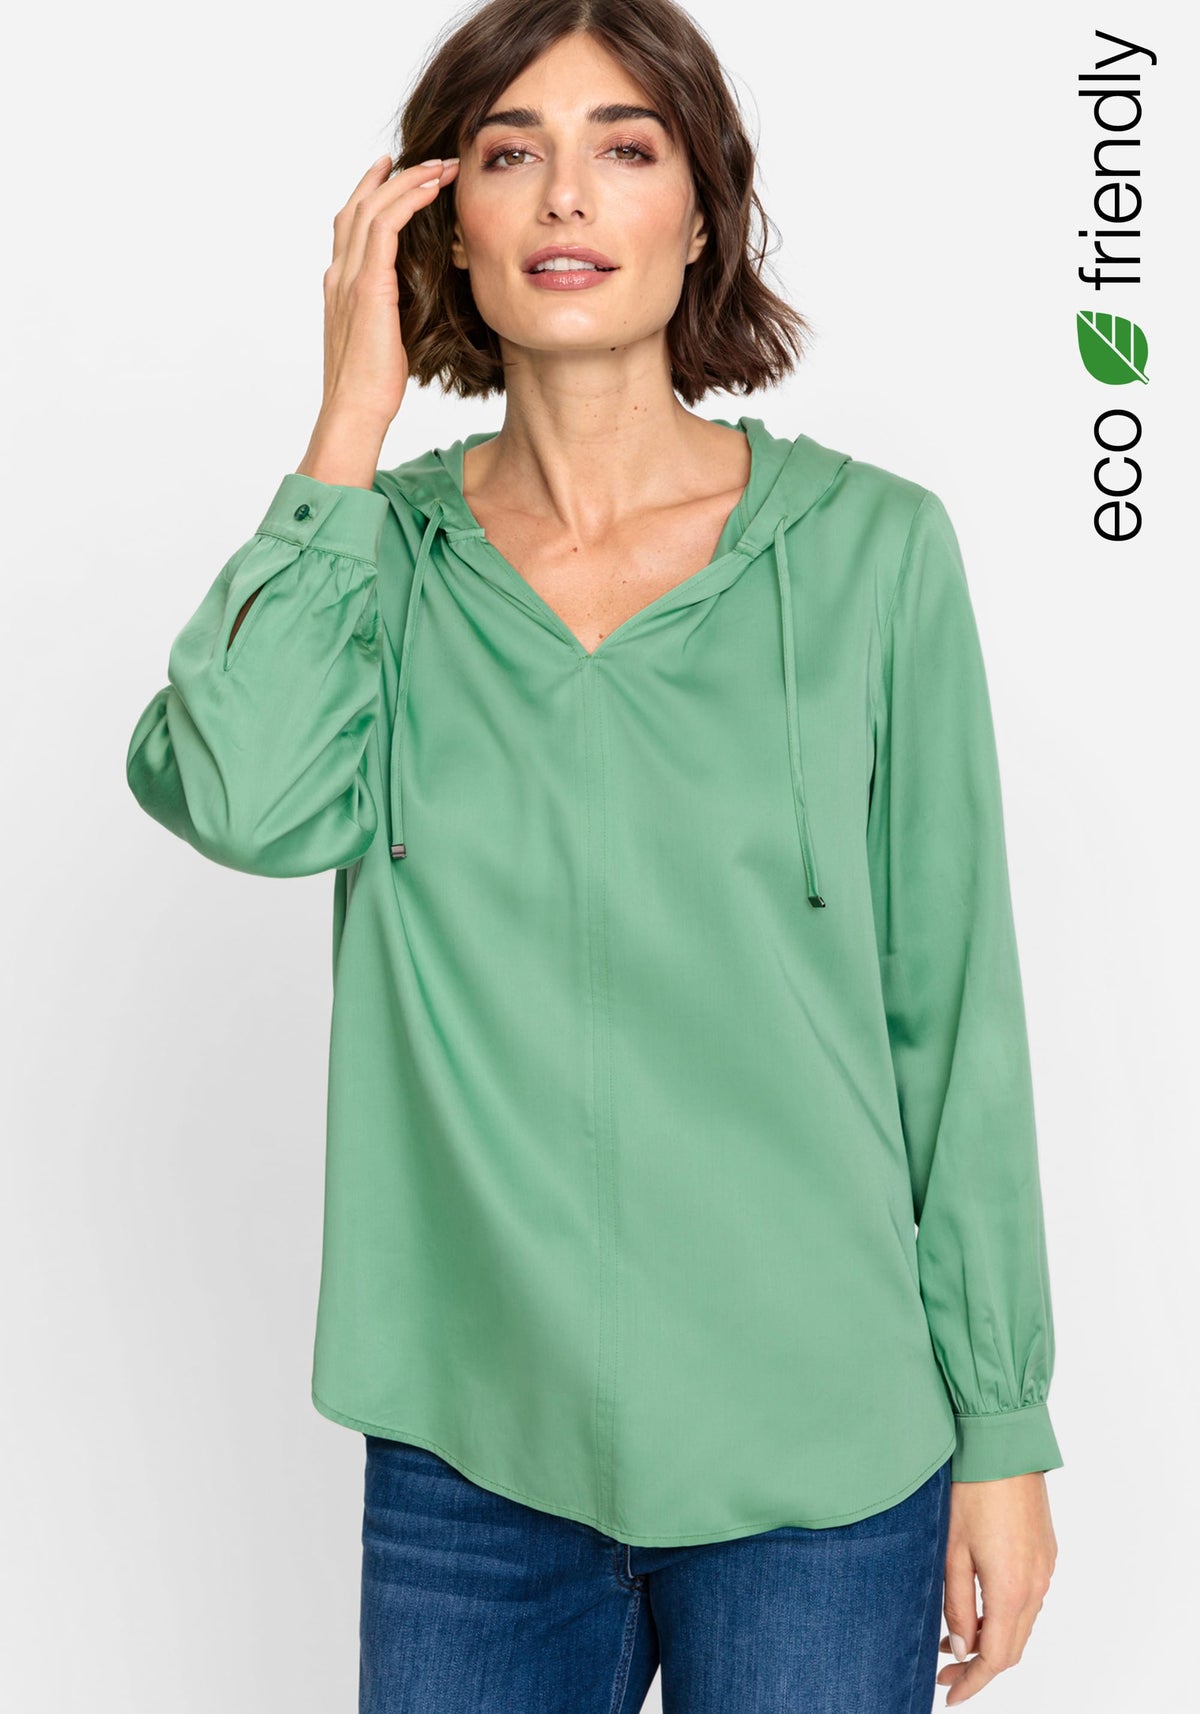 Satin Effect Hoodie Blouse containing TENCEL™ Lyocell